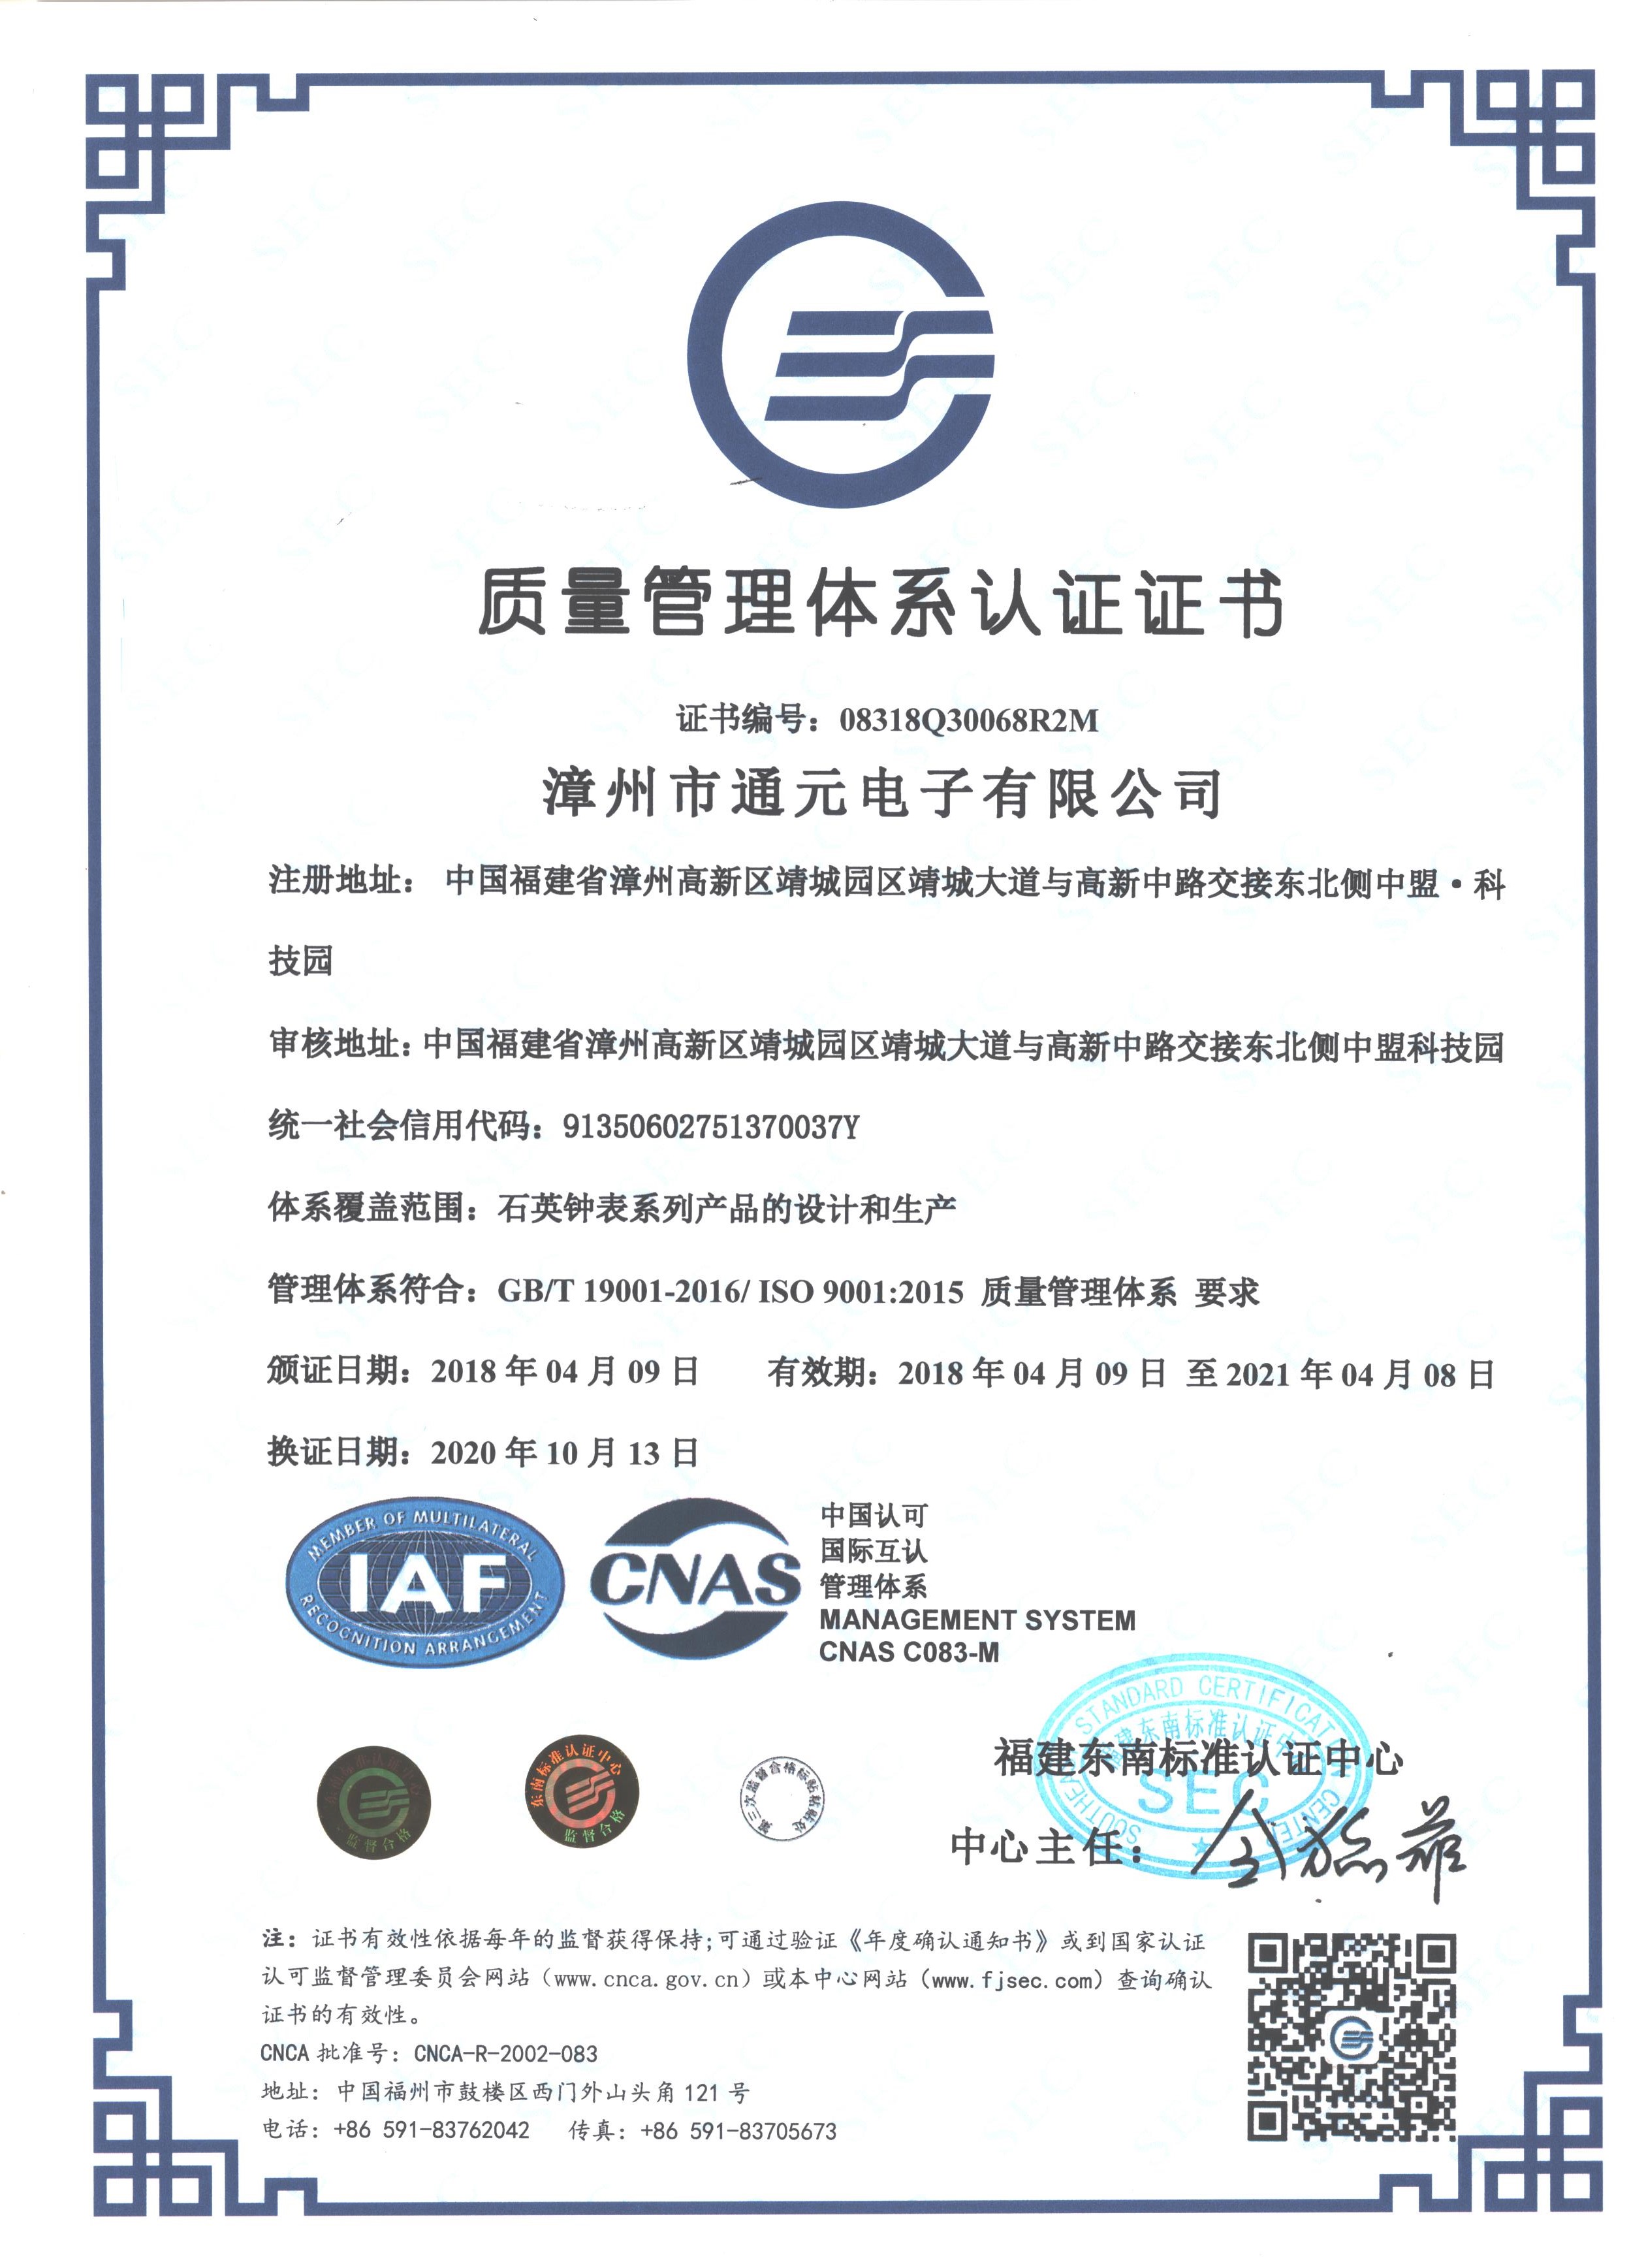 Quality Management System Chinese